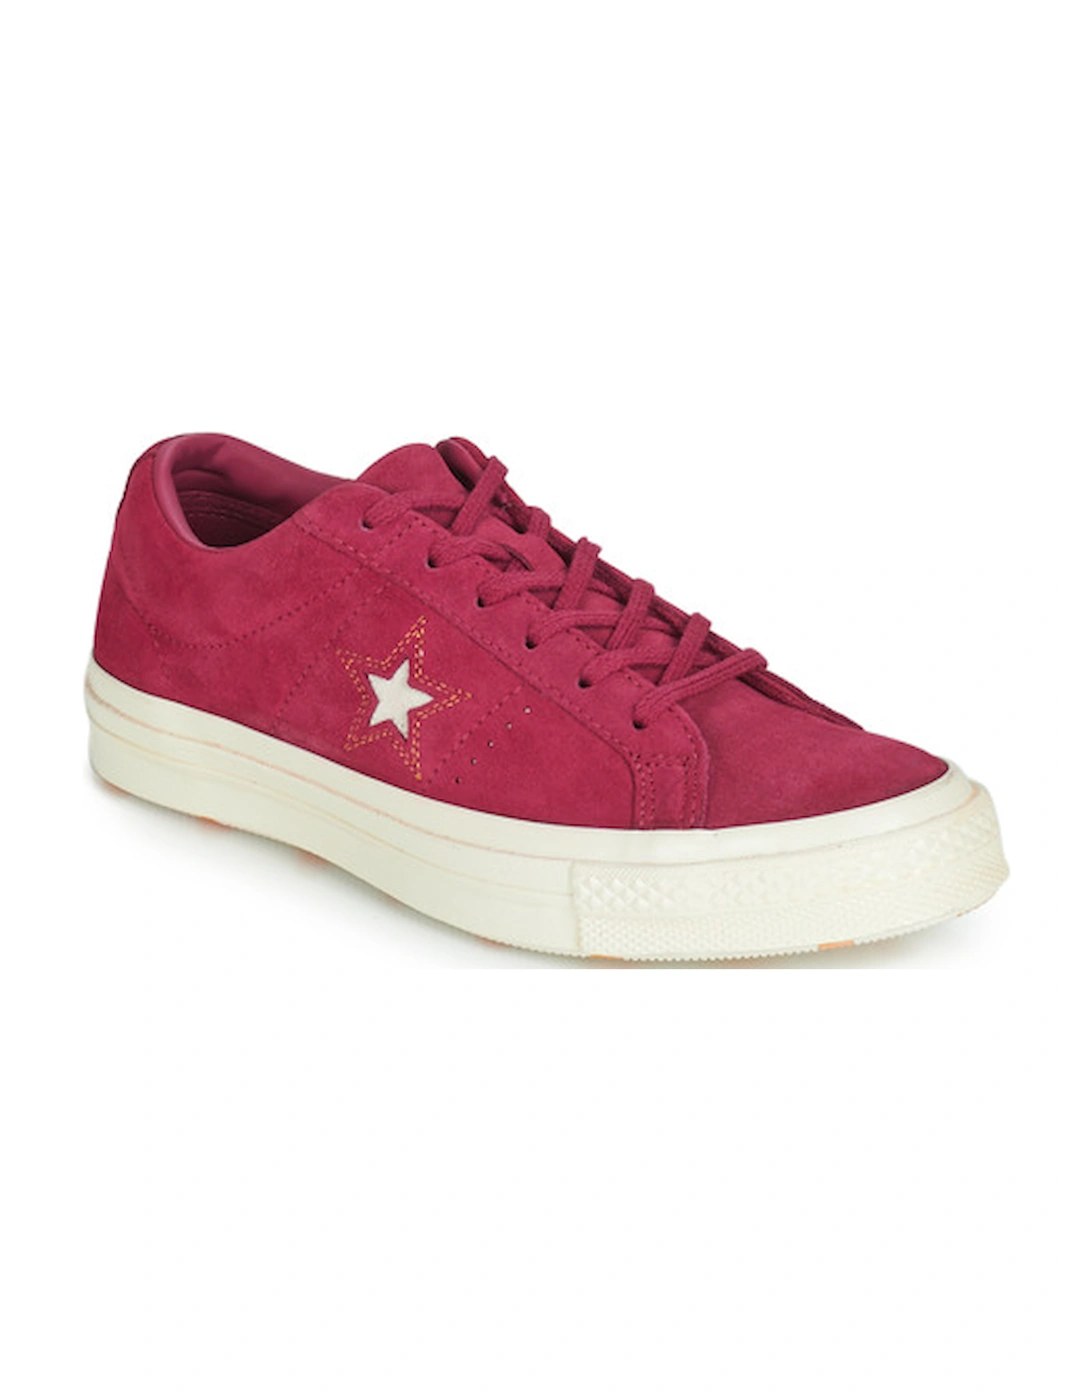 ONE STAR LOVE IN THE DETAILS SUEDE OX, 9 of 8